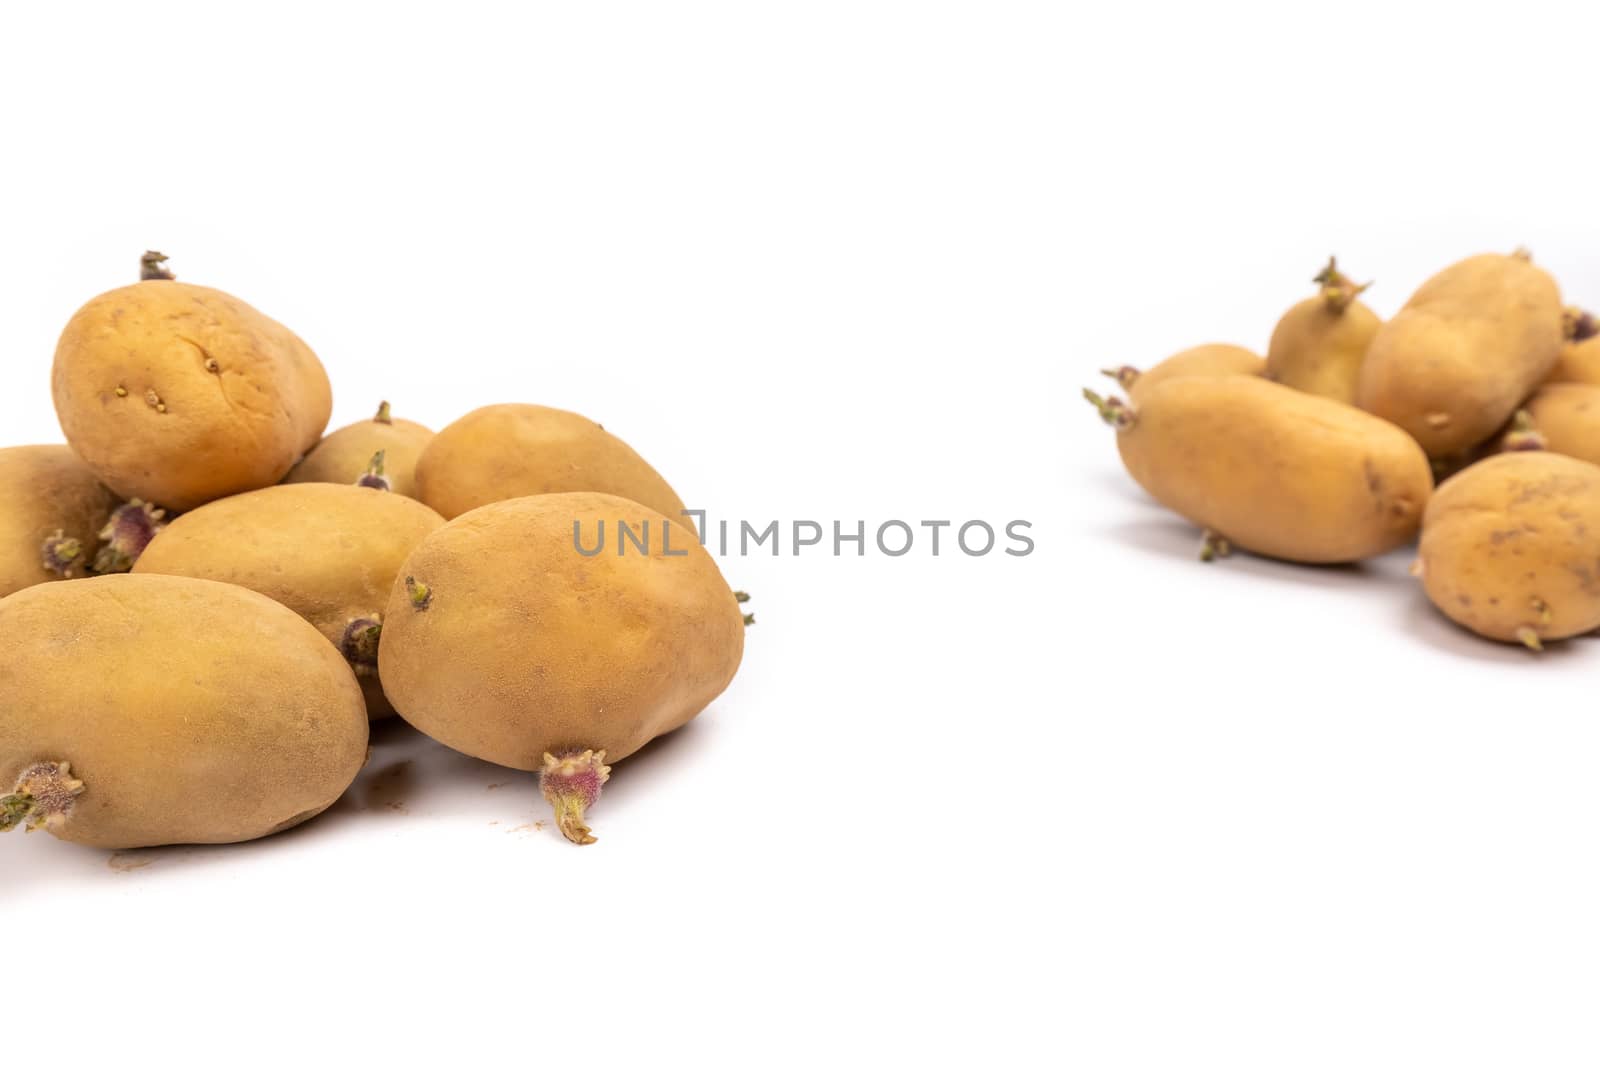 set of sprouted potato plants ready for planting - on white background in studio